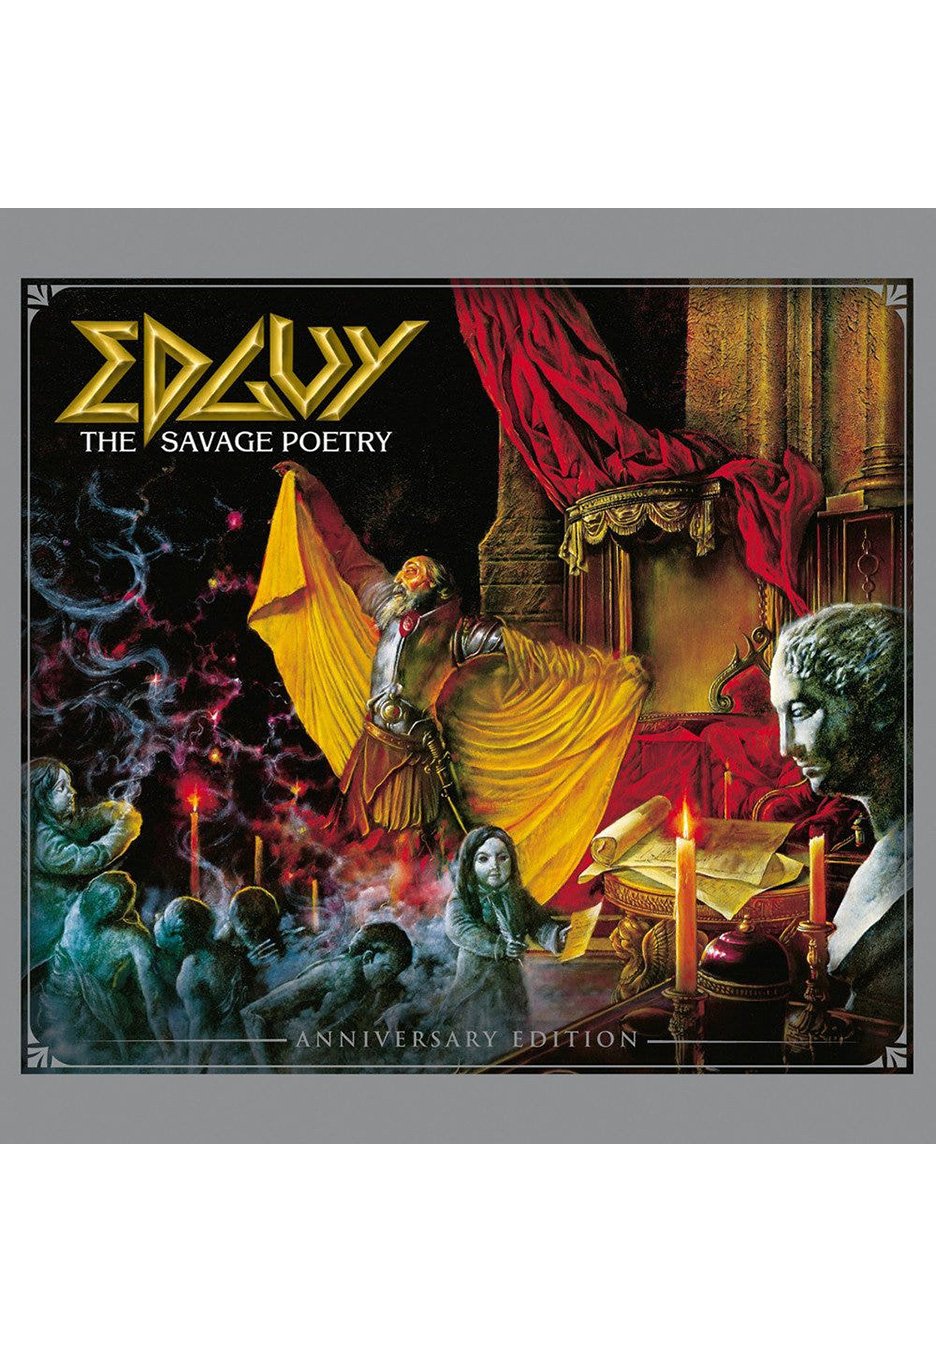 Edguy - The Savage Poetry Anniv. Edition Yellow - Colored Vinyl